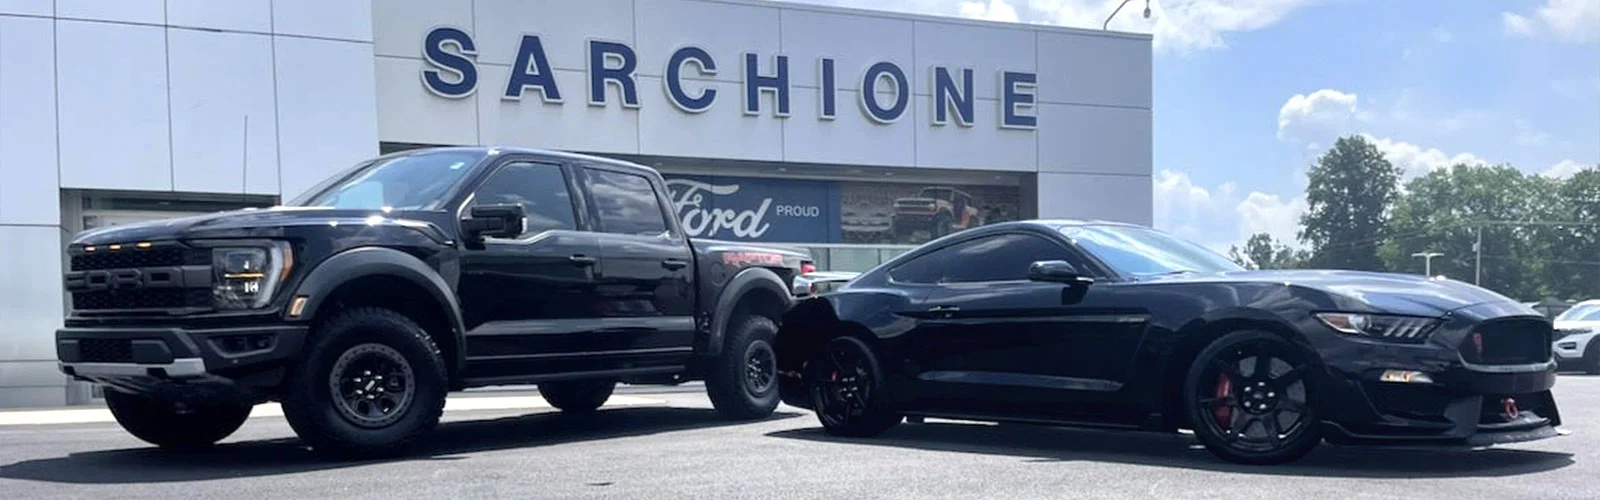 image of black ford mustang and black ford truck